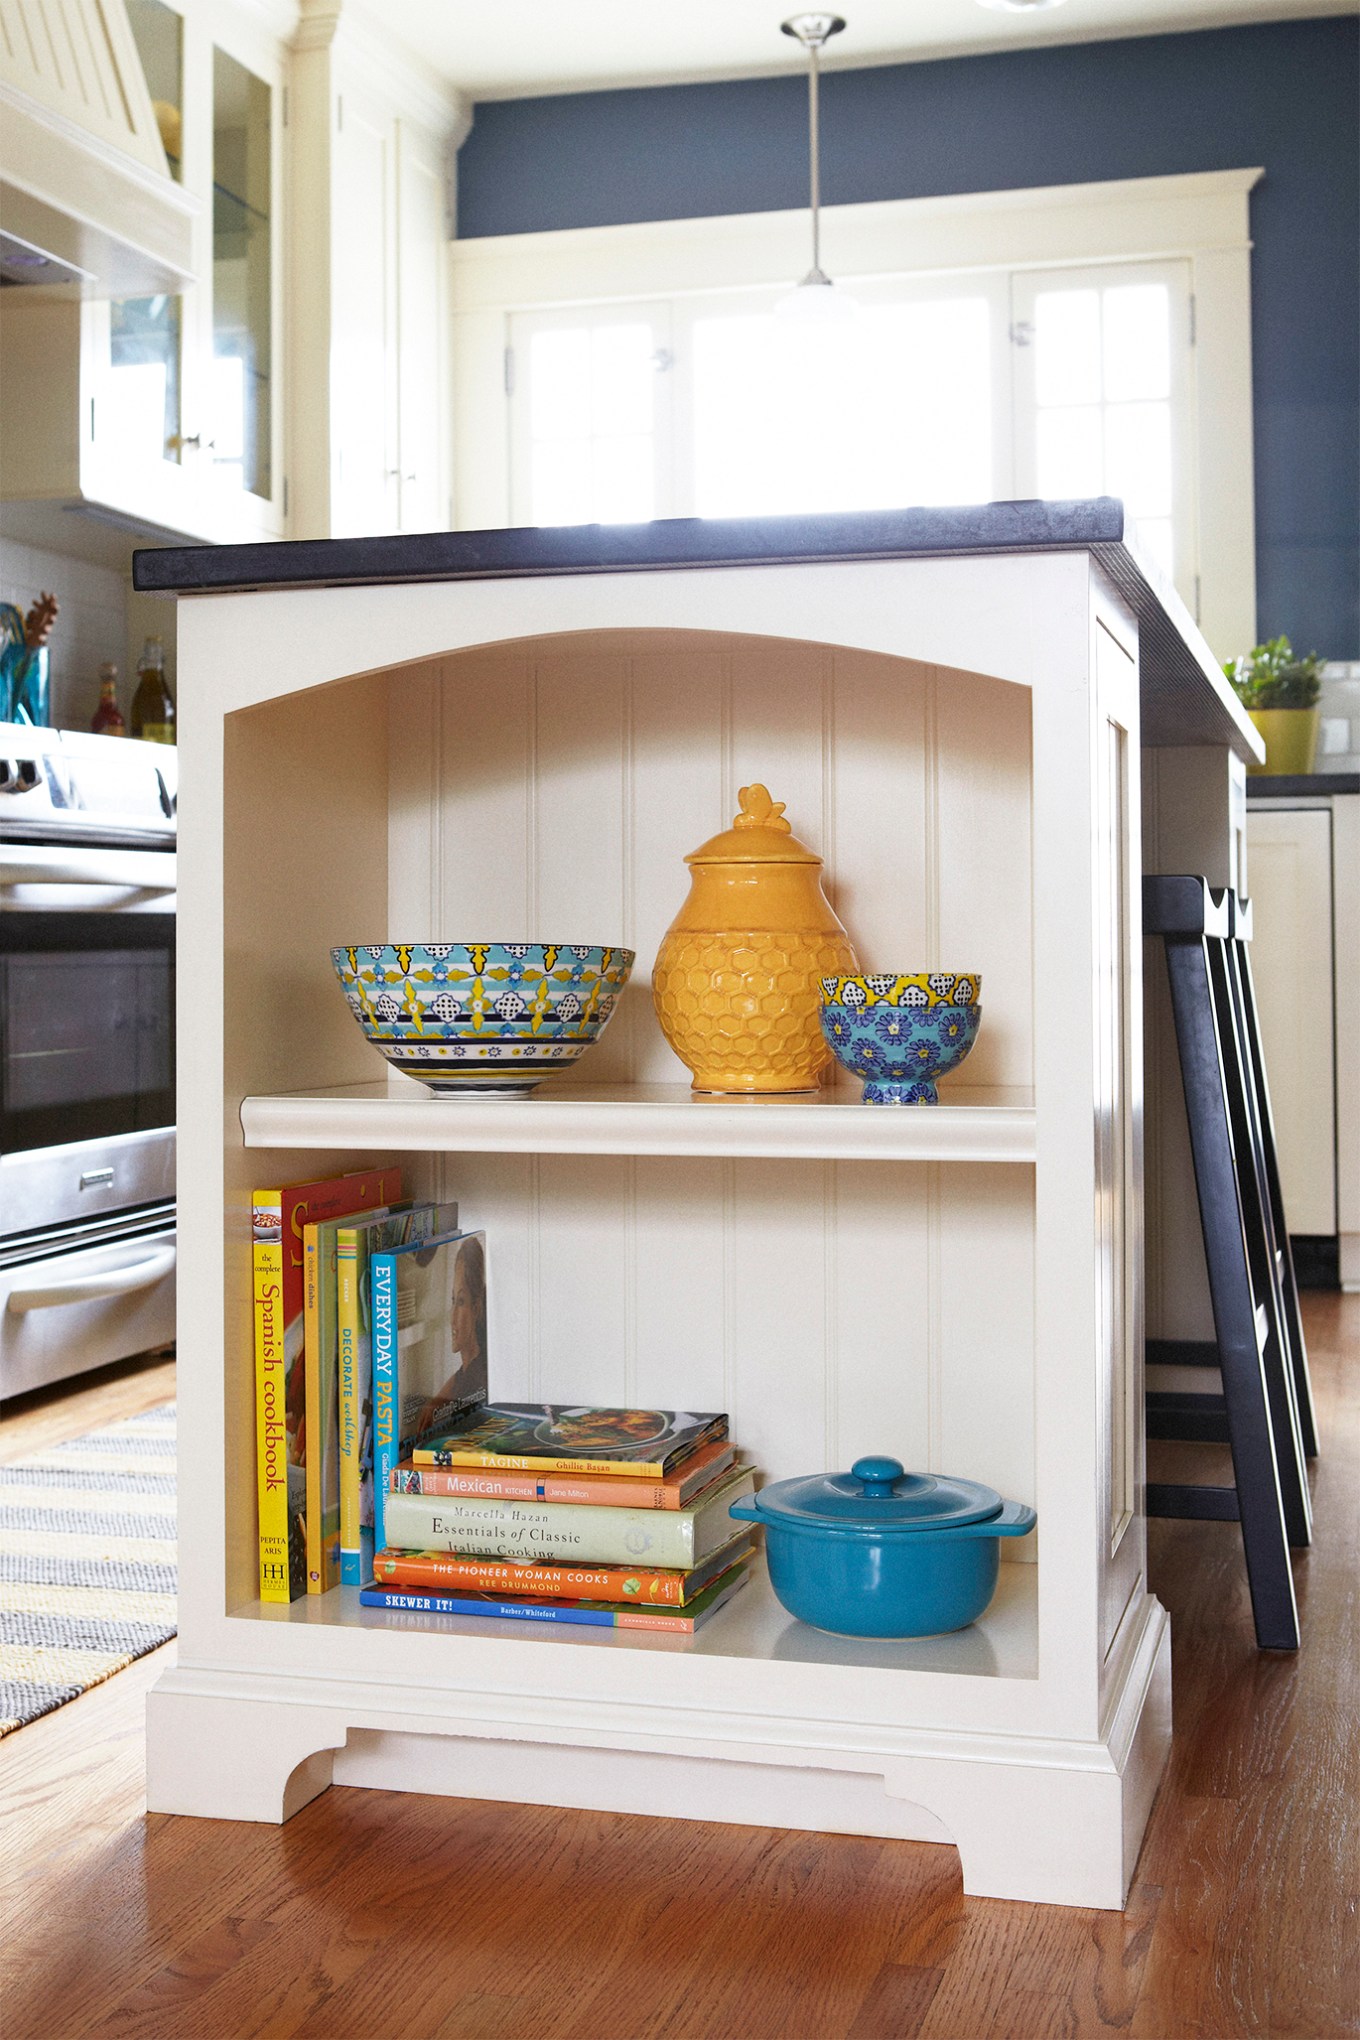 Organize shelf in kitchen with yellow pots and cookbooks